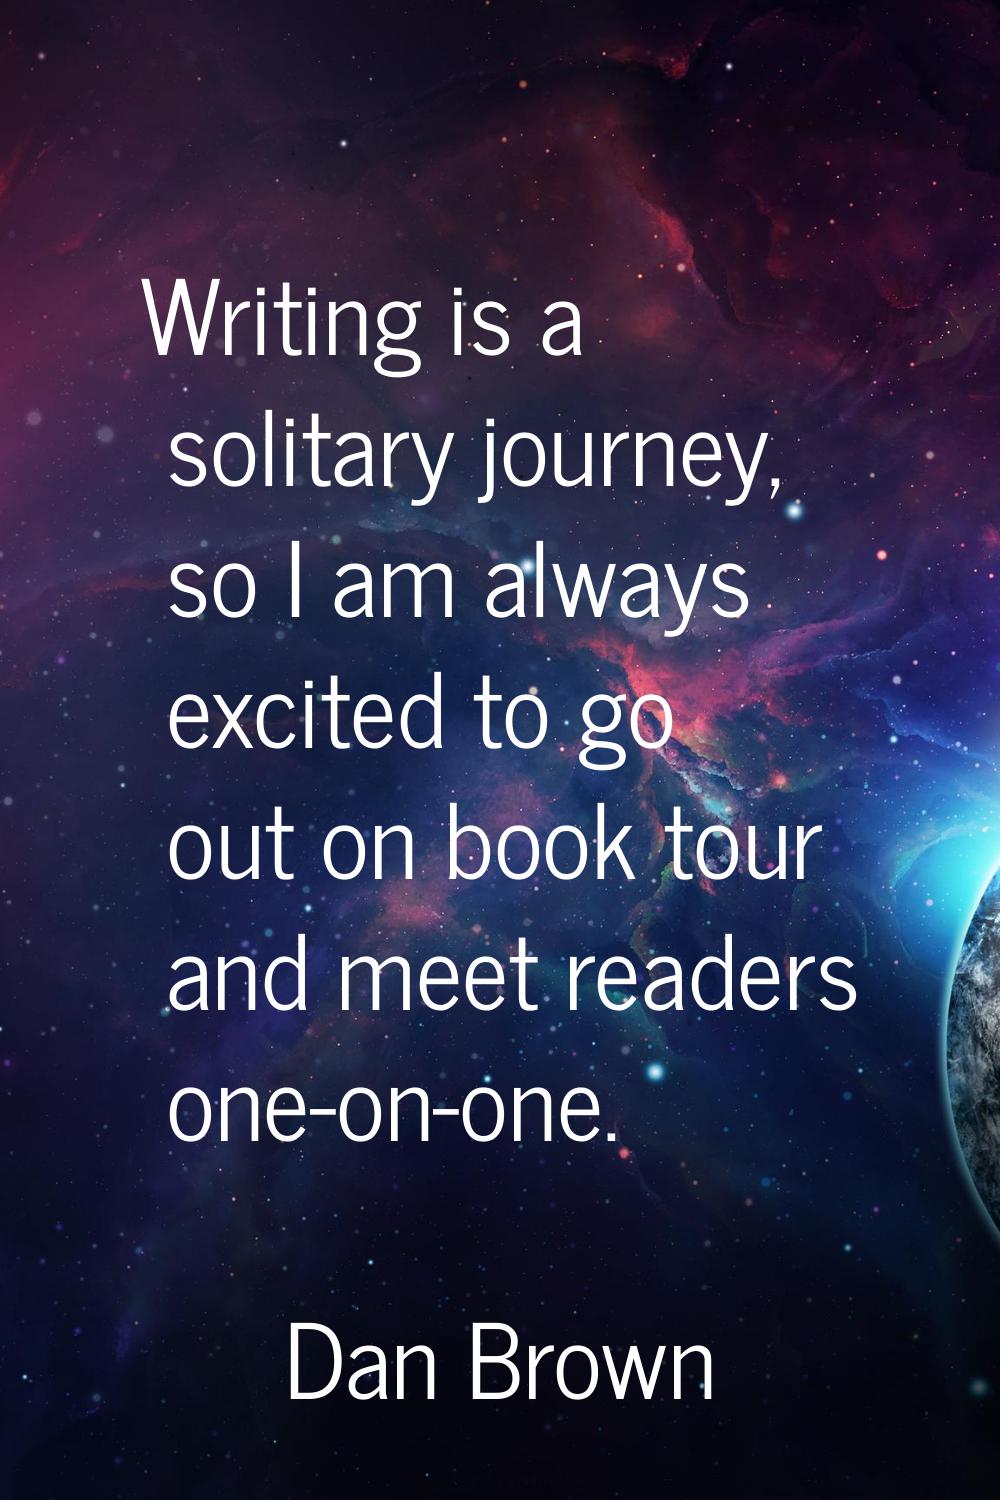 Writing is a solitary journey, so I am always excited to go out on book tour and meet readers one-o